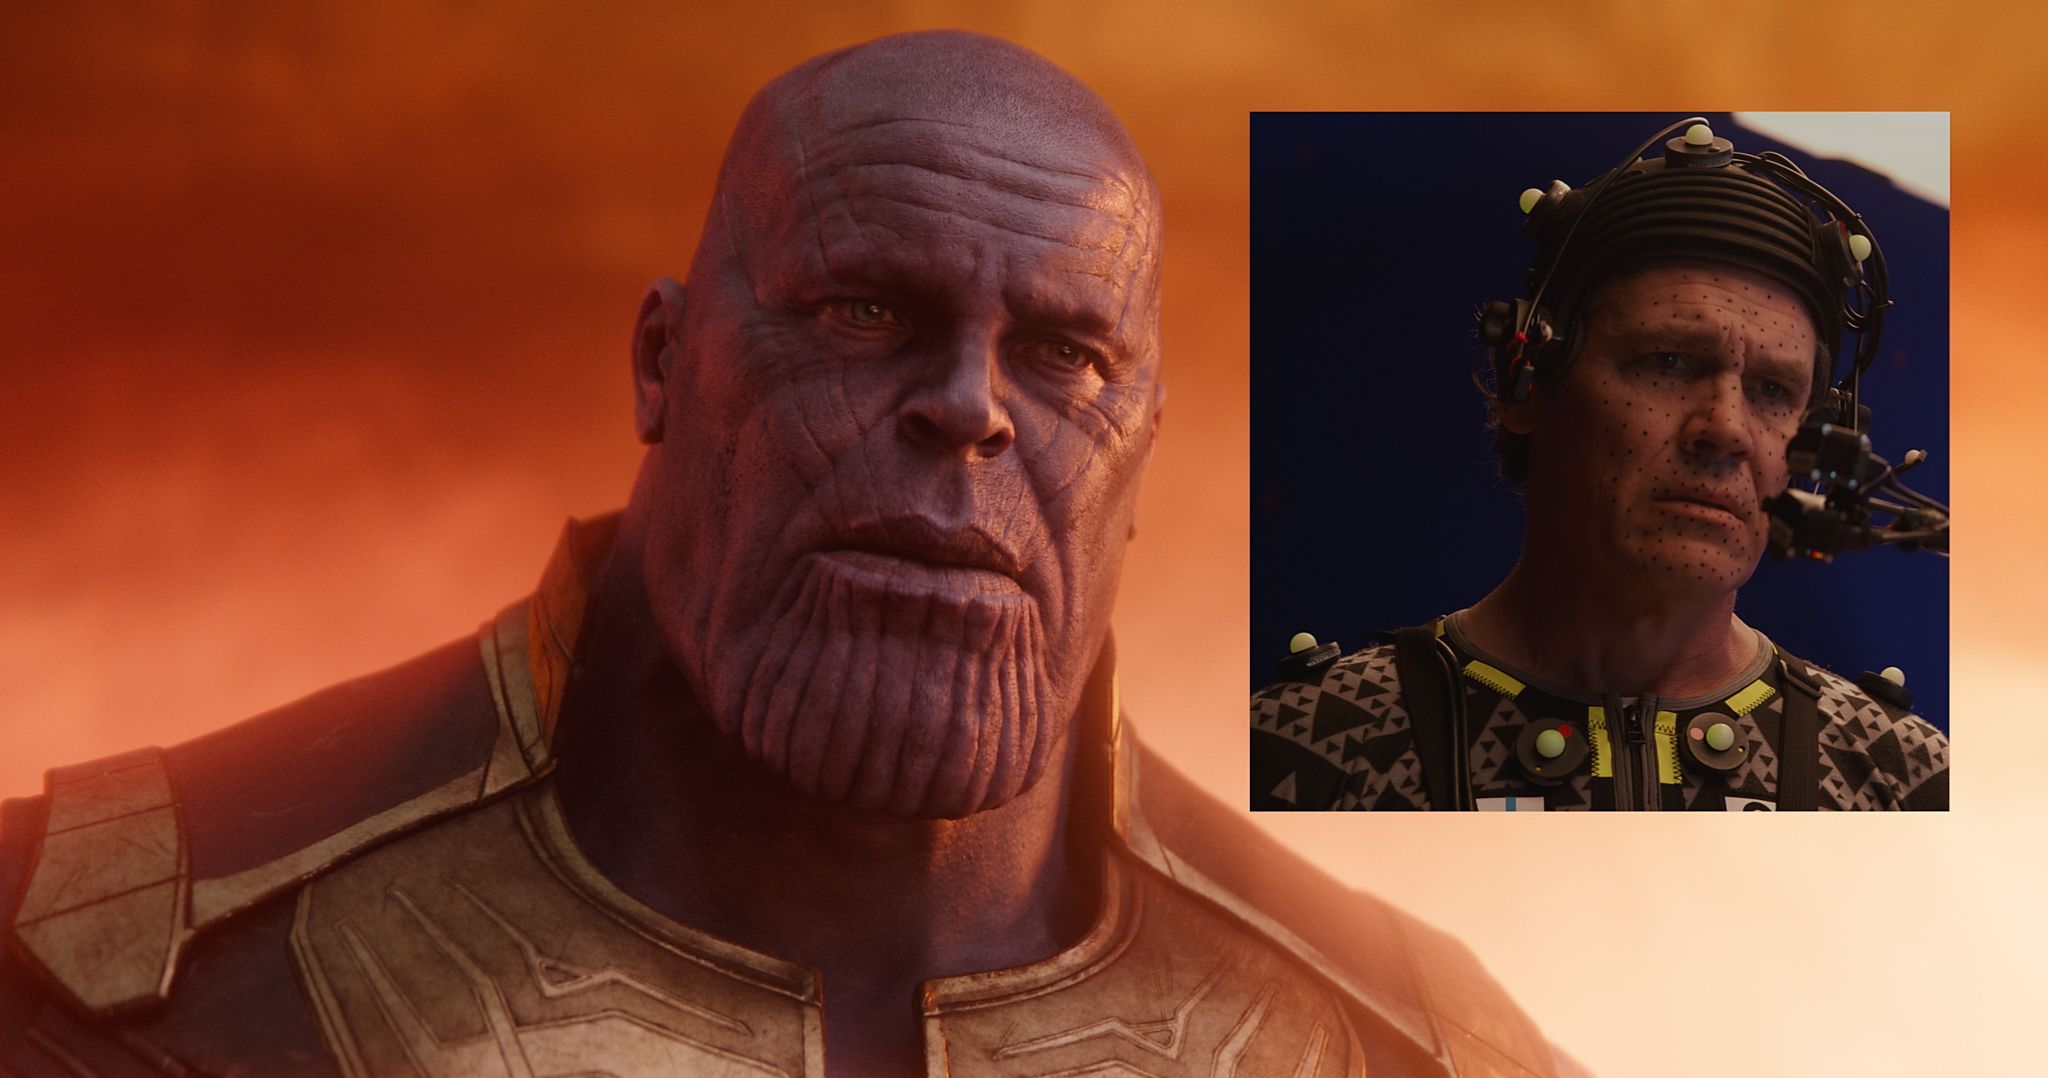 Thanos and Josh Brolin in performance capture rig for Avengers: Infinity War